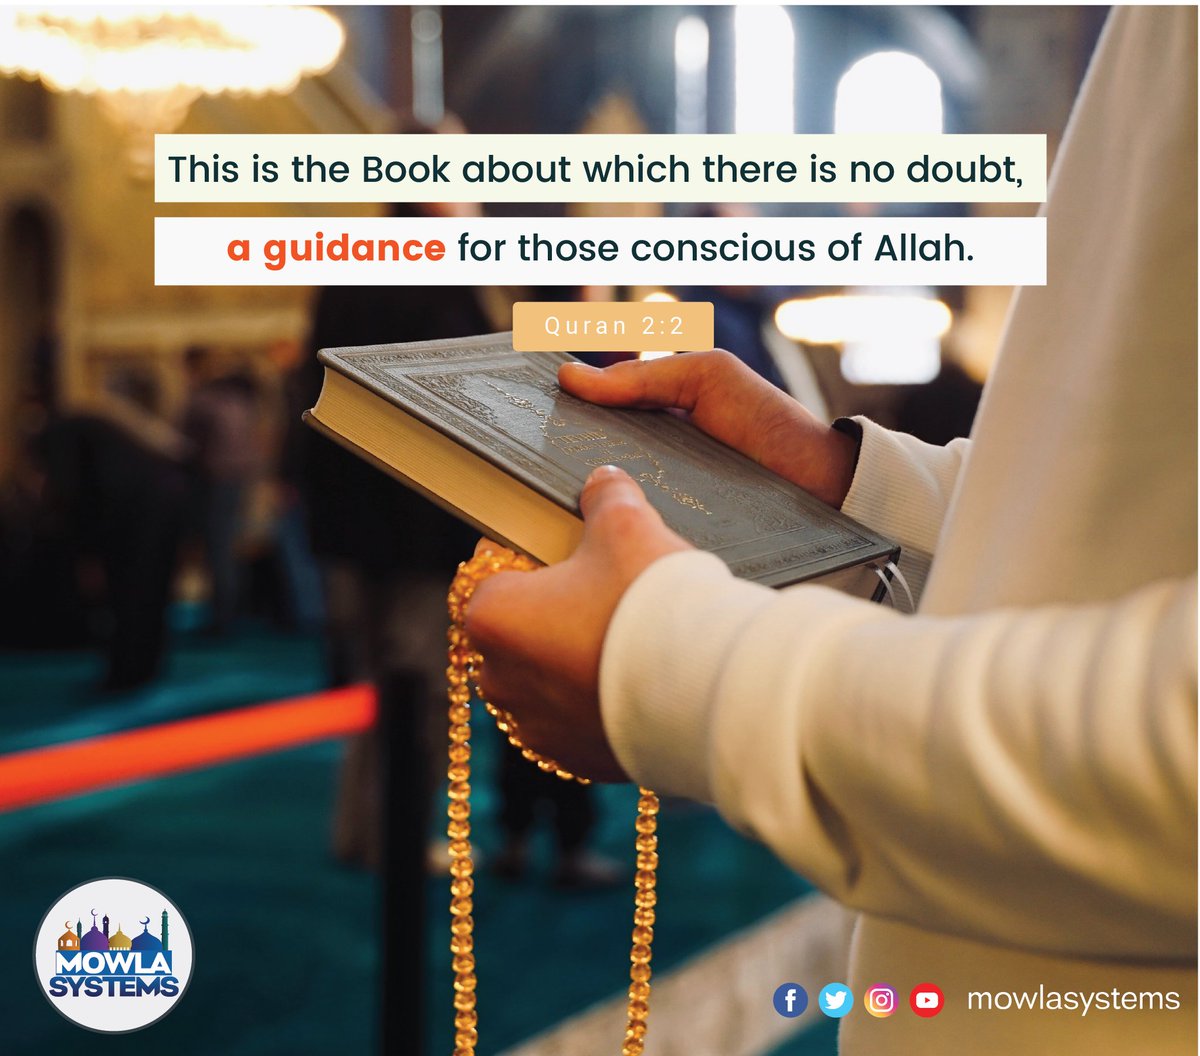 The Quran - A Timeless Guide for All Mankind.

#Quran #Quranicguidance #Quranicteachings #Quran22 #Islamicreminders #guidancefromAllah #Muslims #timlesswisdom #Quranicverses #consciousofAllah #mowlaSystems #masjid_management_system #masjid_mobile_app